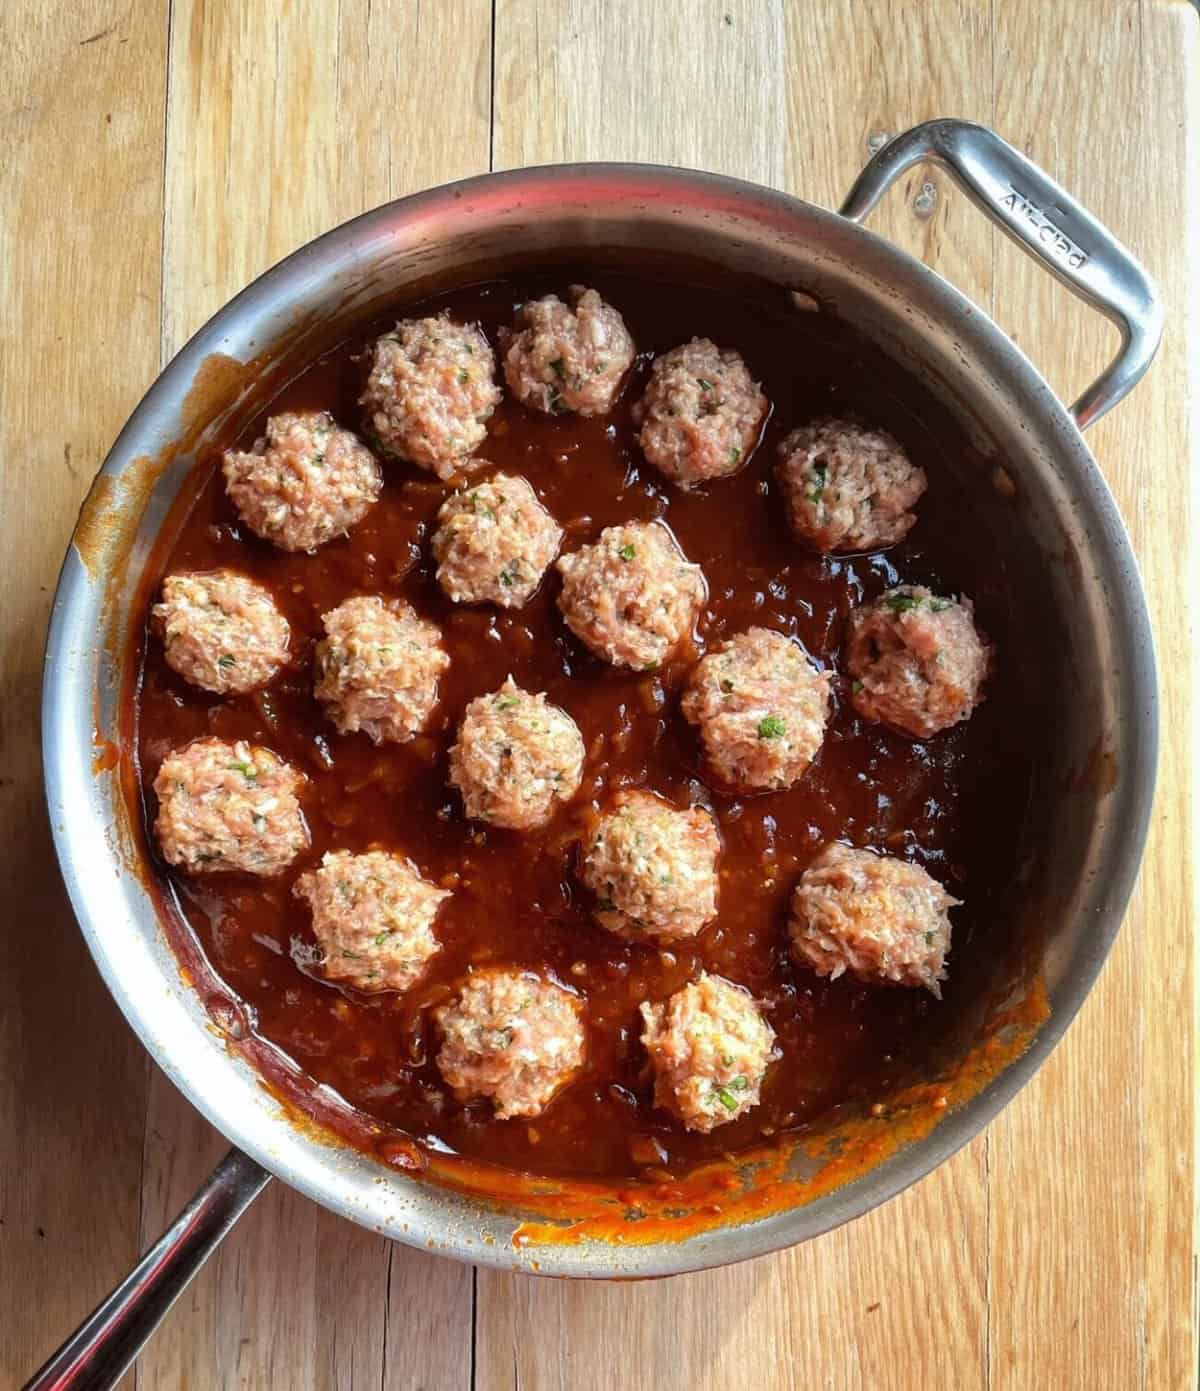 uncooked chicken meatballs sitting in barbecue sauce.